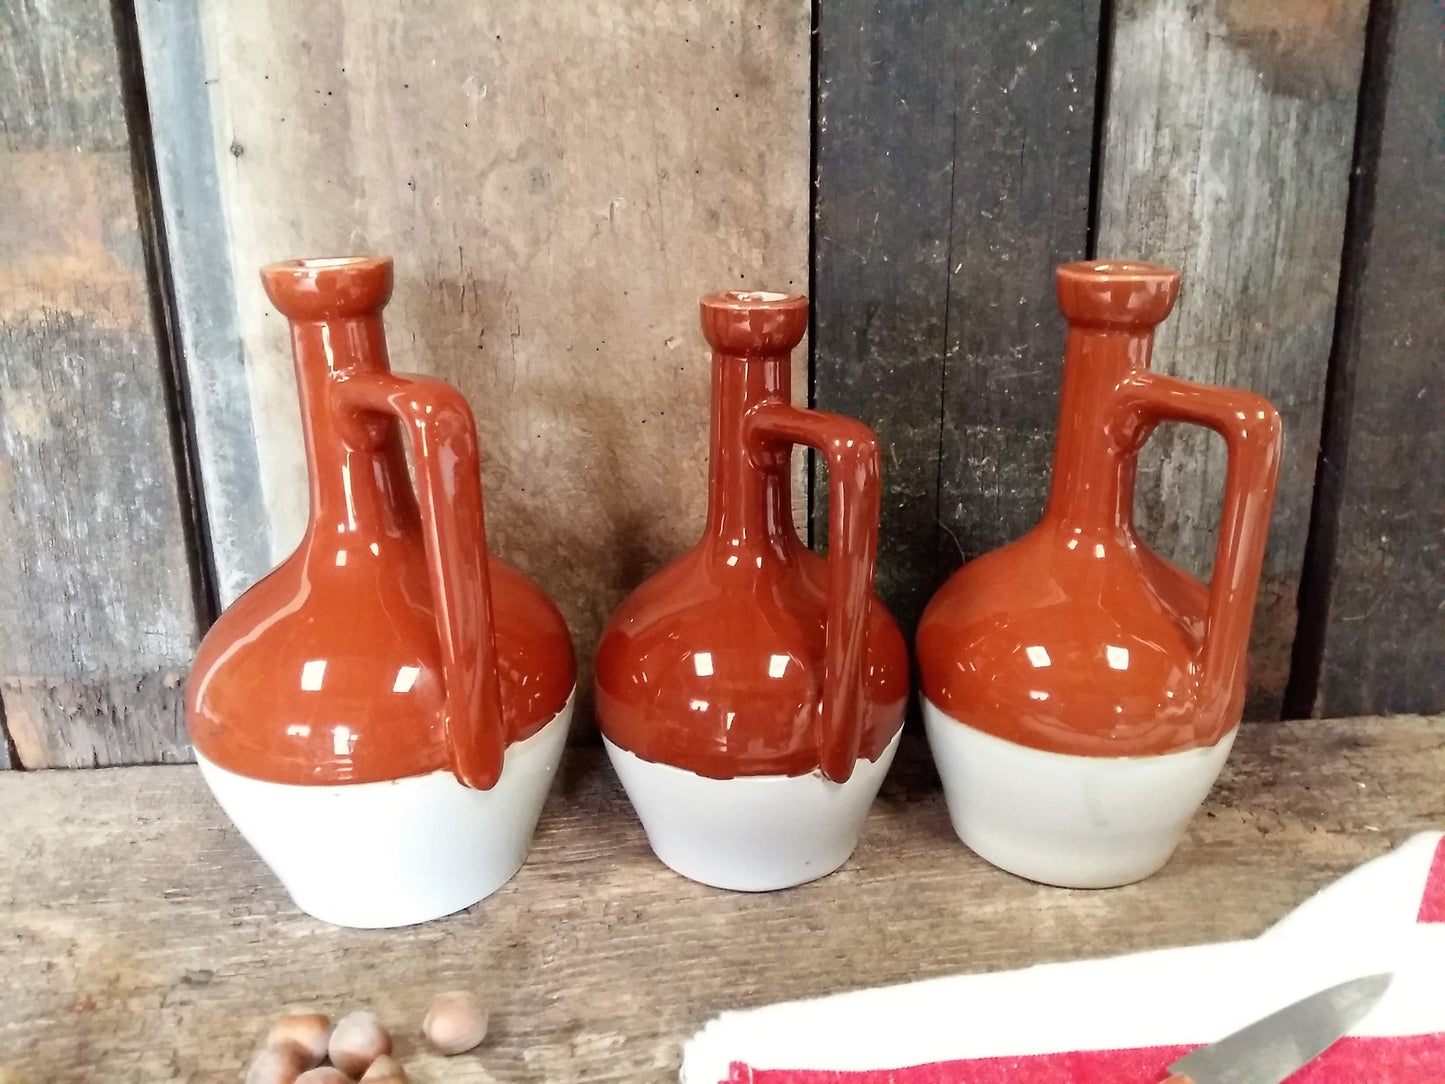 THREE Earthenware Pitchers. "P. Bardinet 100/75cl Distillateur Bordeaux Déposé". from Tiggy and Pip - €89.00! Shop now at Tiggy and Pip